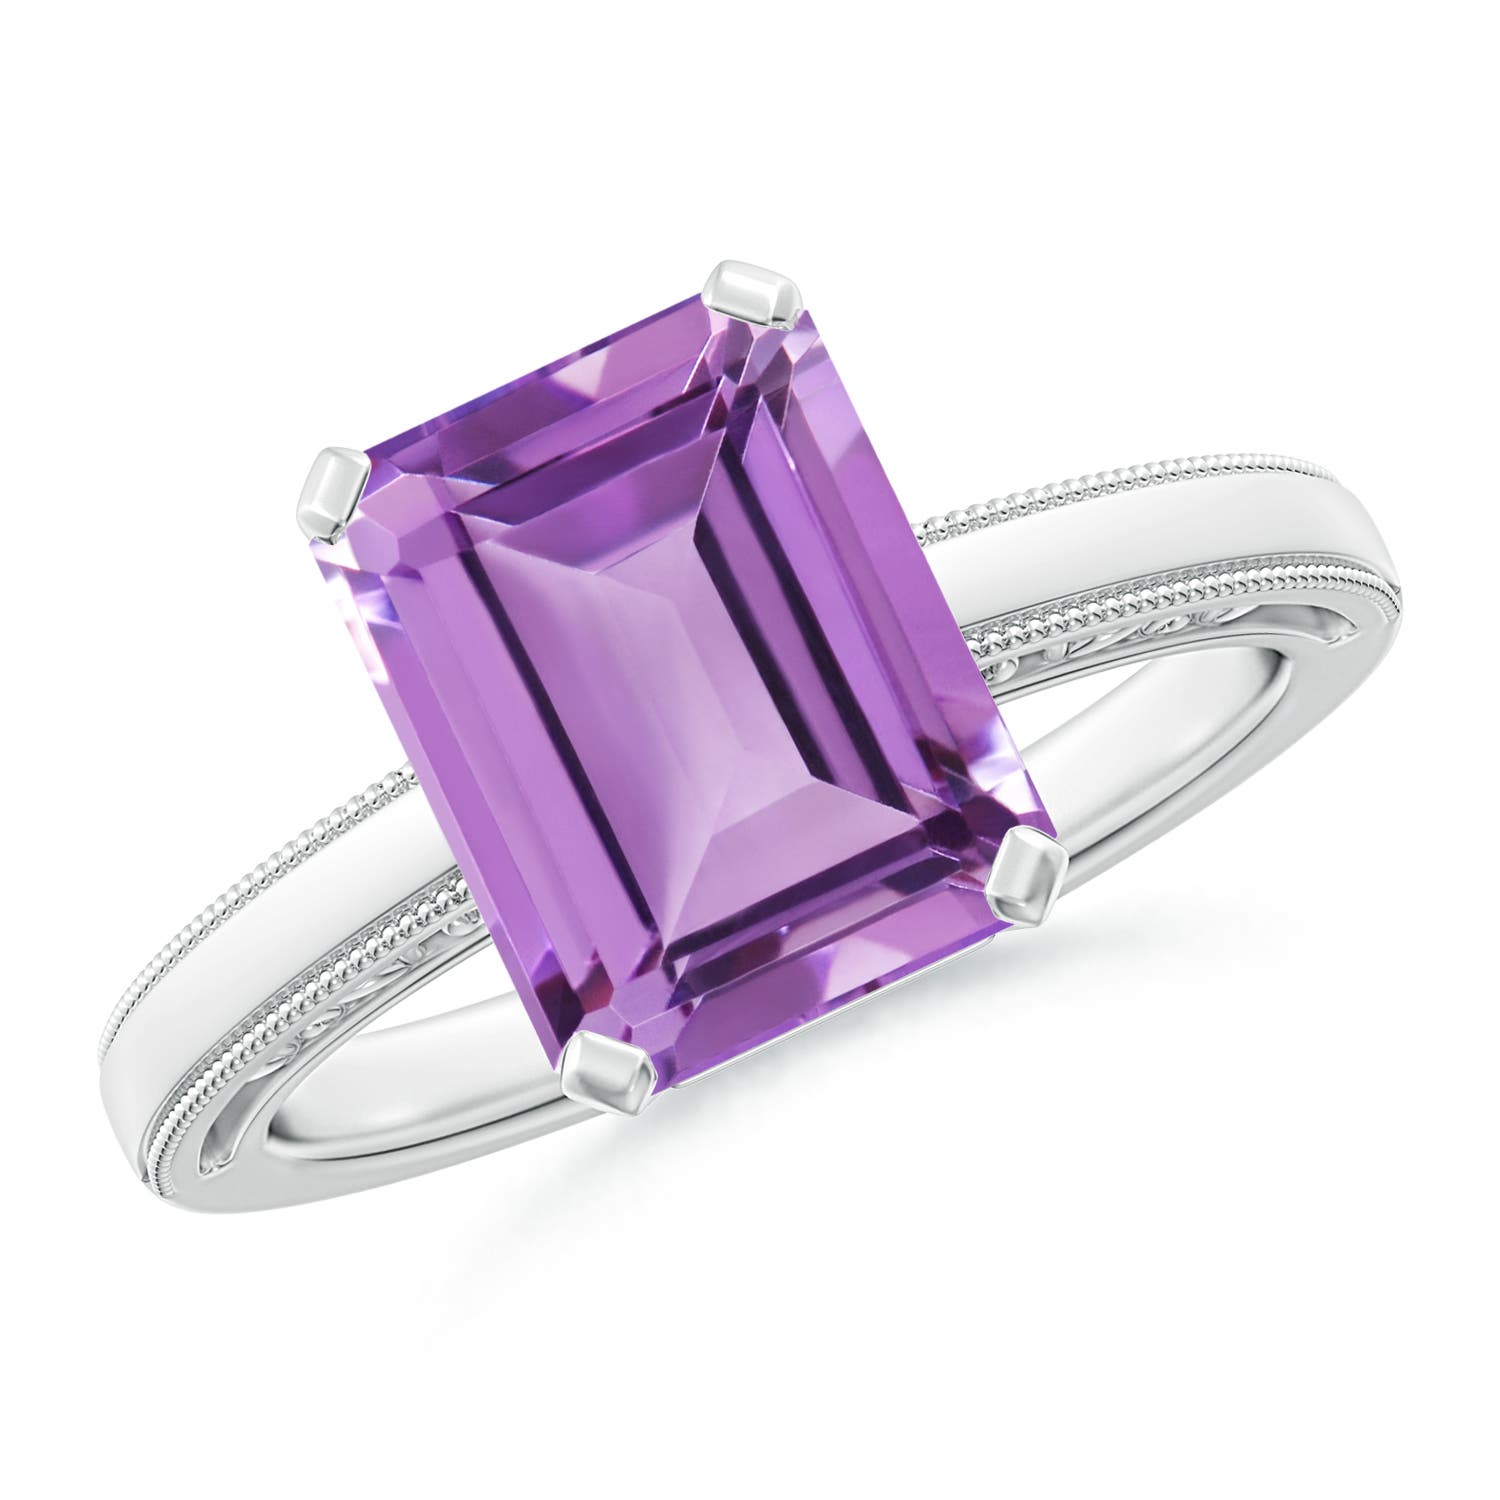 A - Amethyst / 2.9 CT / 14 KT White Gold